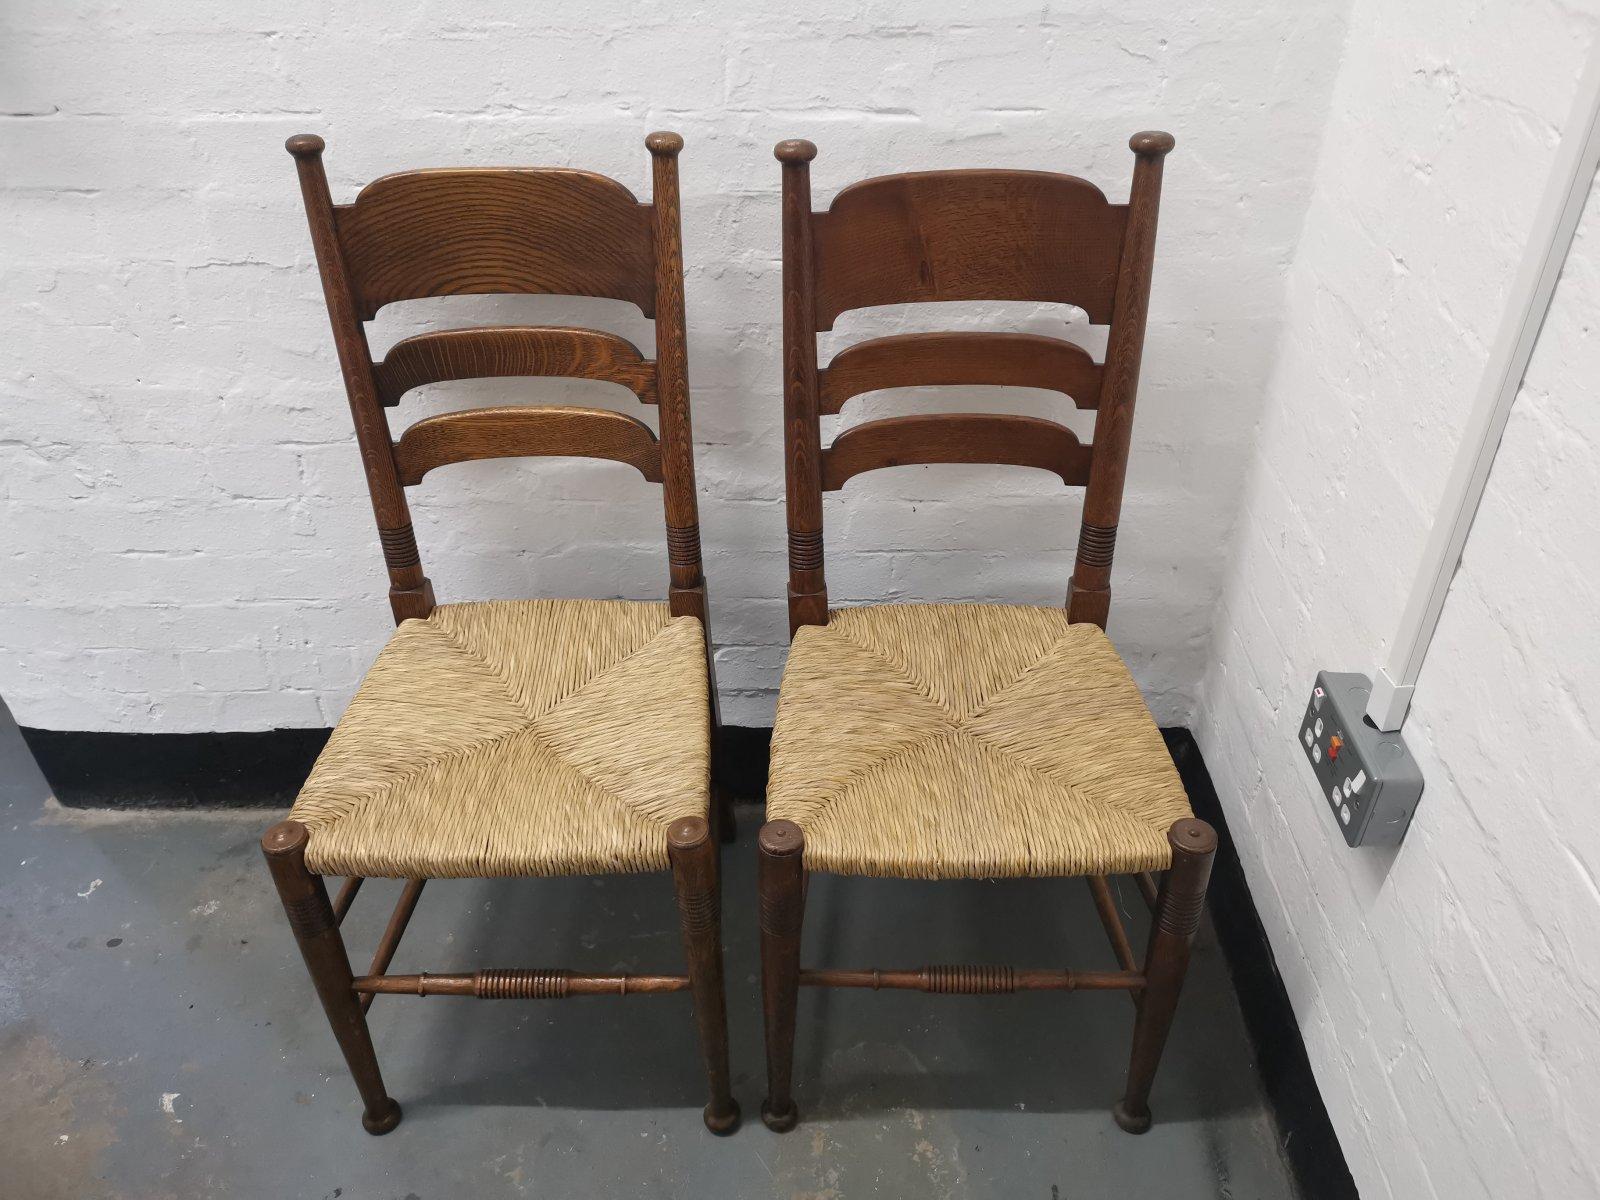 Liberty & Co. Made by William Birch
A pair of English Arts & Crafts oak rush-seat dining chairs. 
These chairs have been totally restored and had new rush professionally laid to the seat. To professionally re-rush a chair seat demands a good deal of